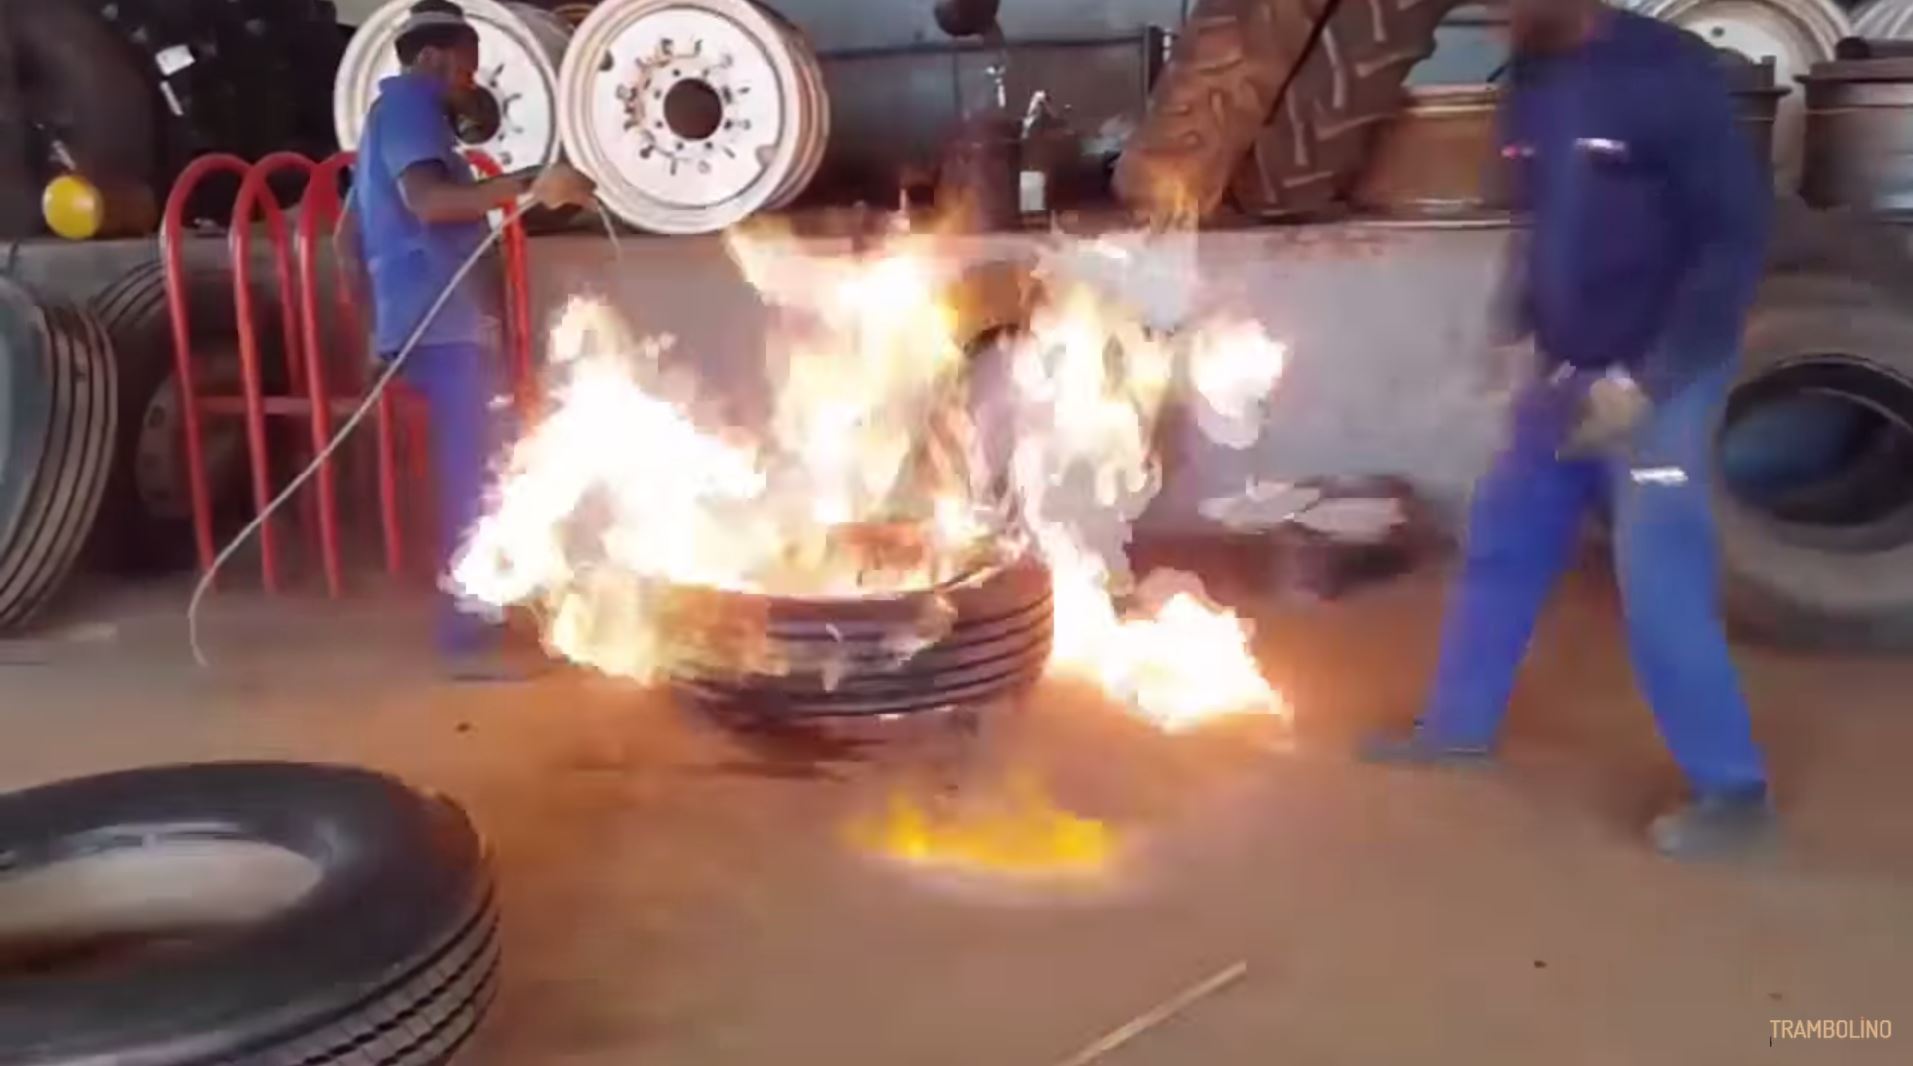 Ever Mounted A Tire Using Ether? Explosions, Danger, Possible Bodily Harm, And More!